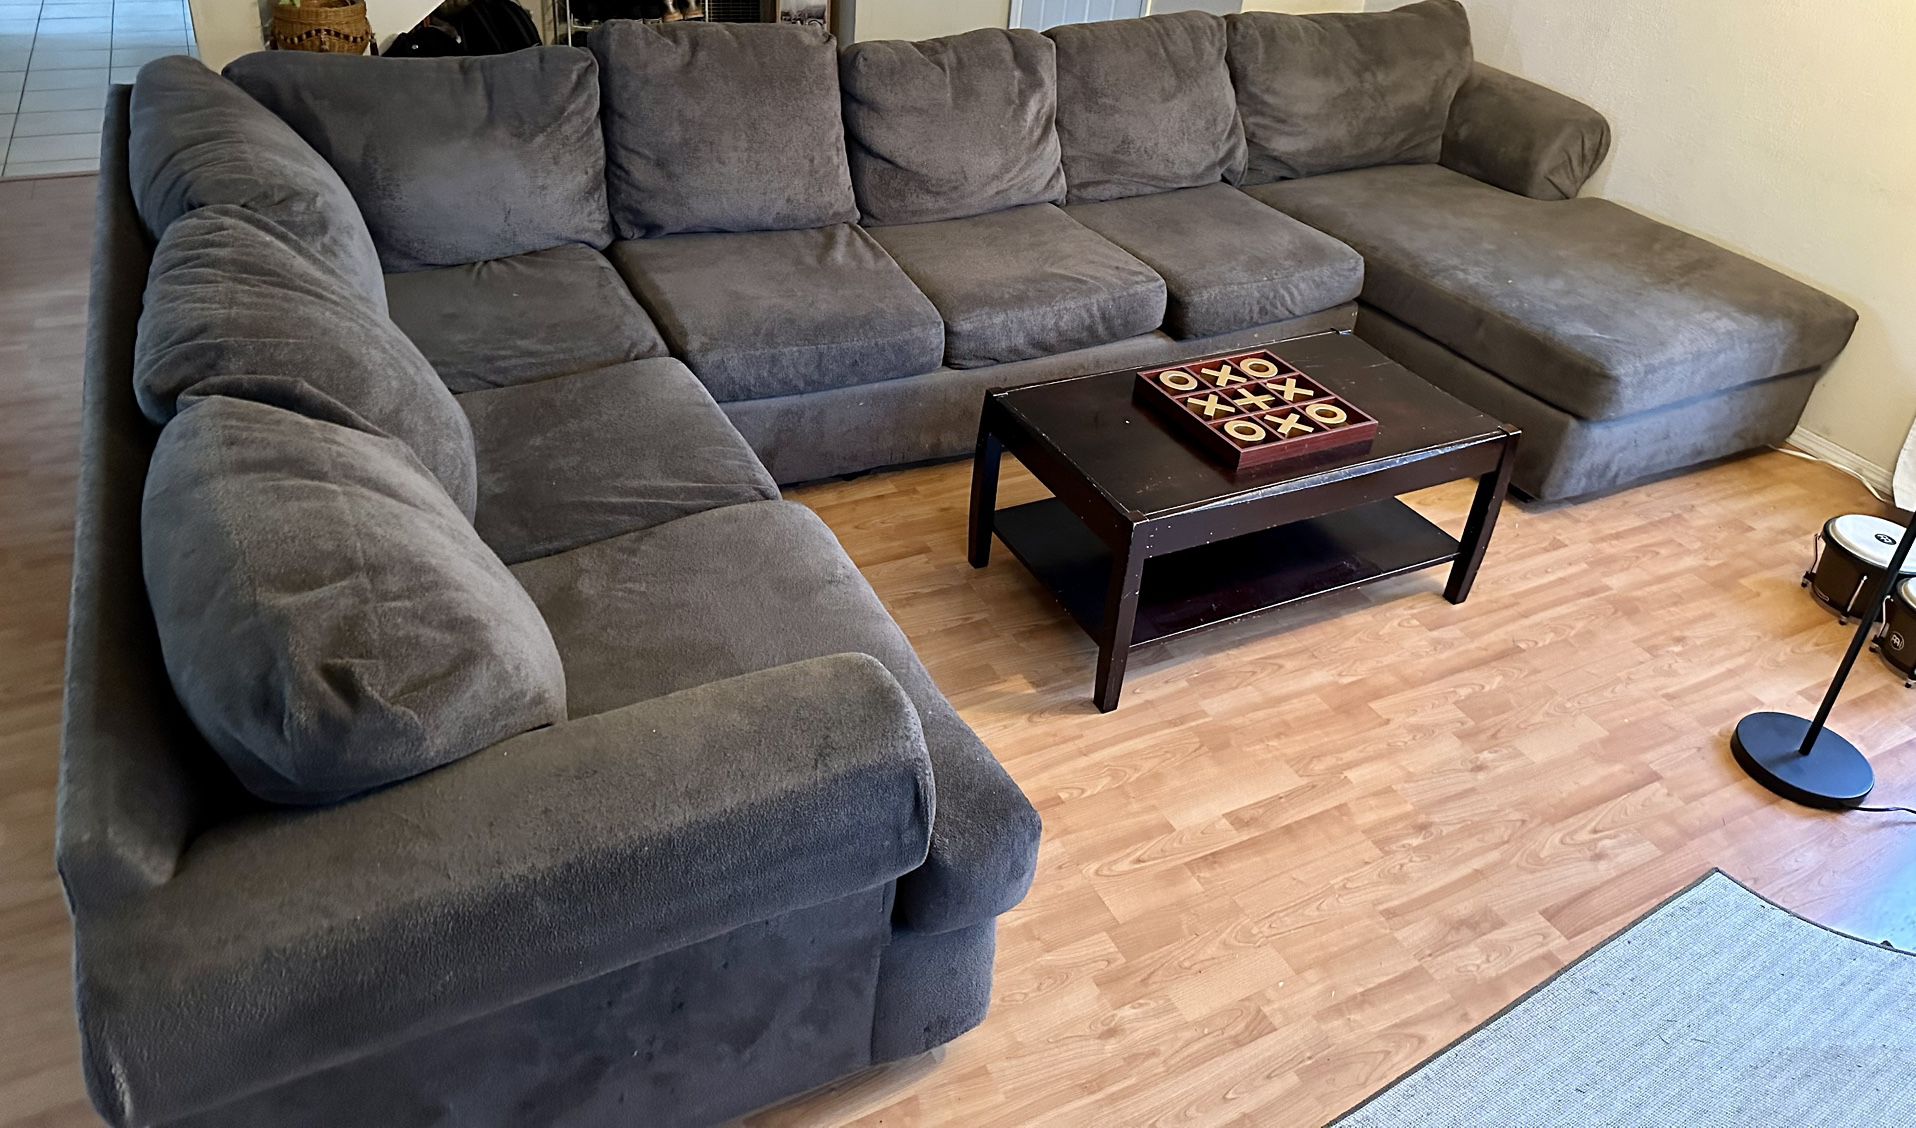 XLarge Sectional Couch And Table - FREE! 